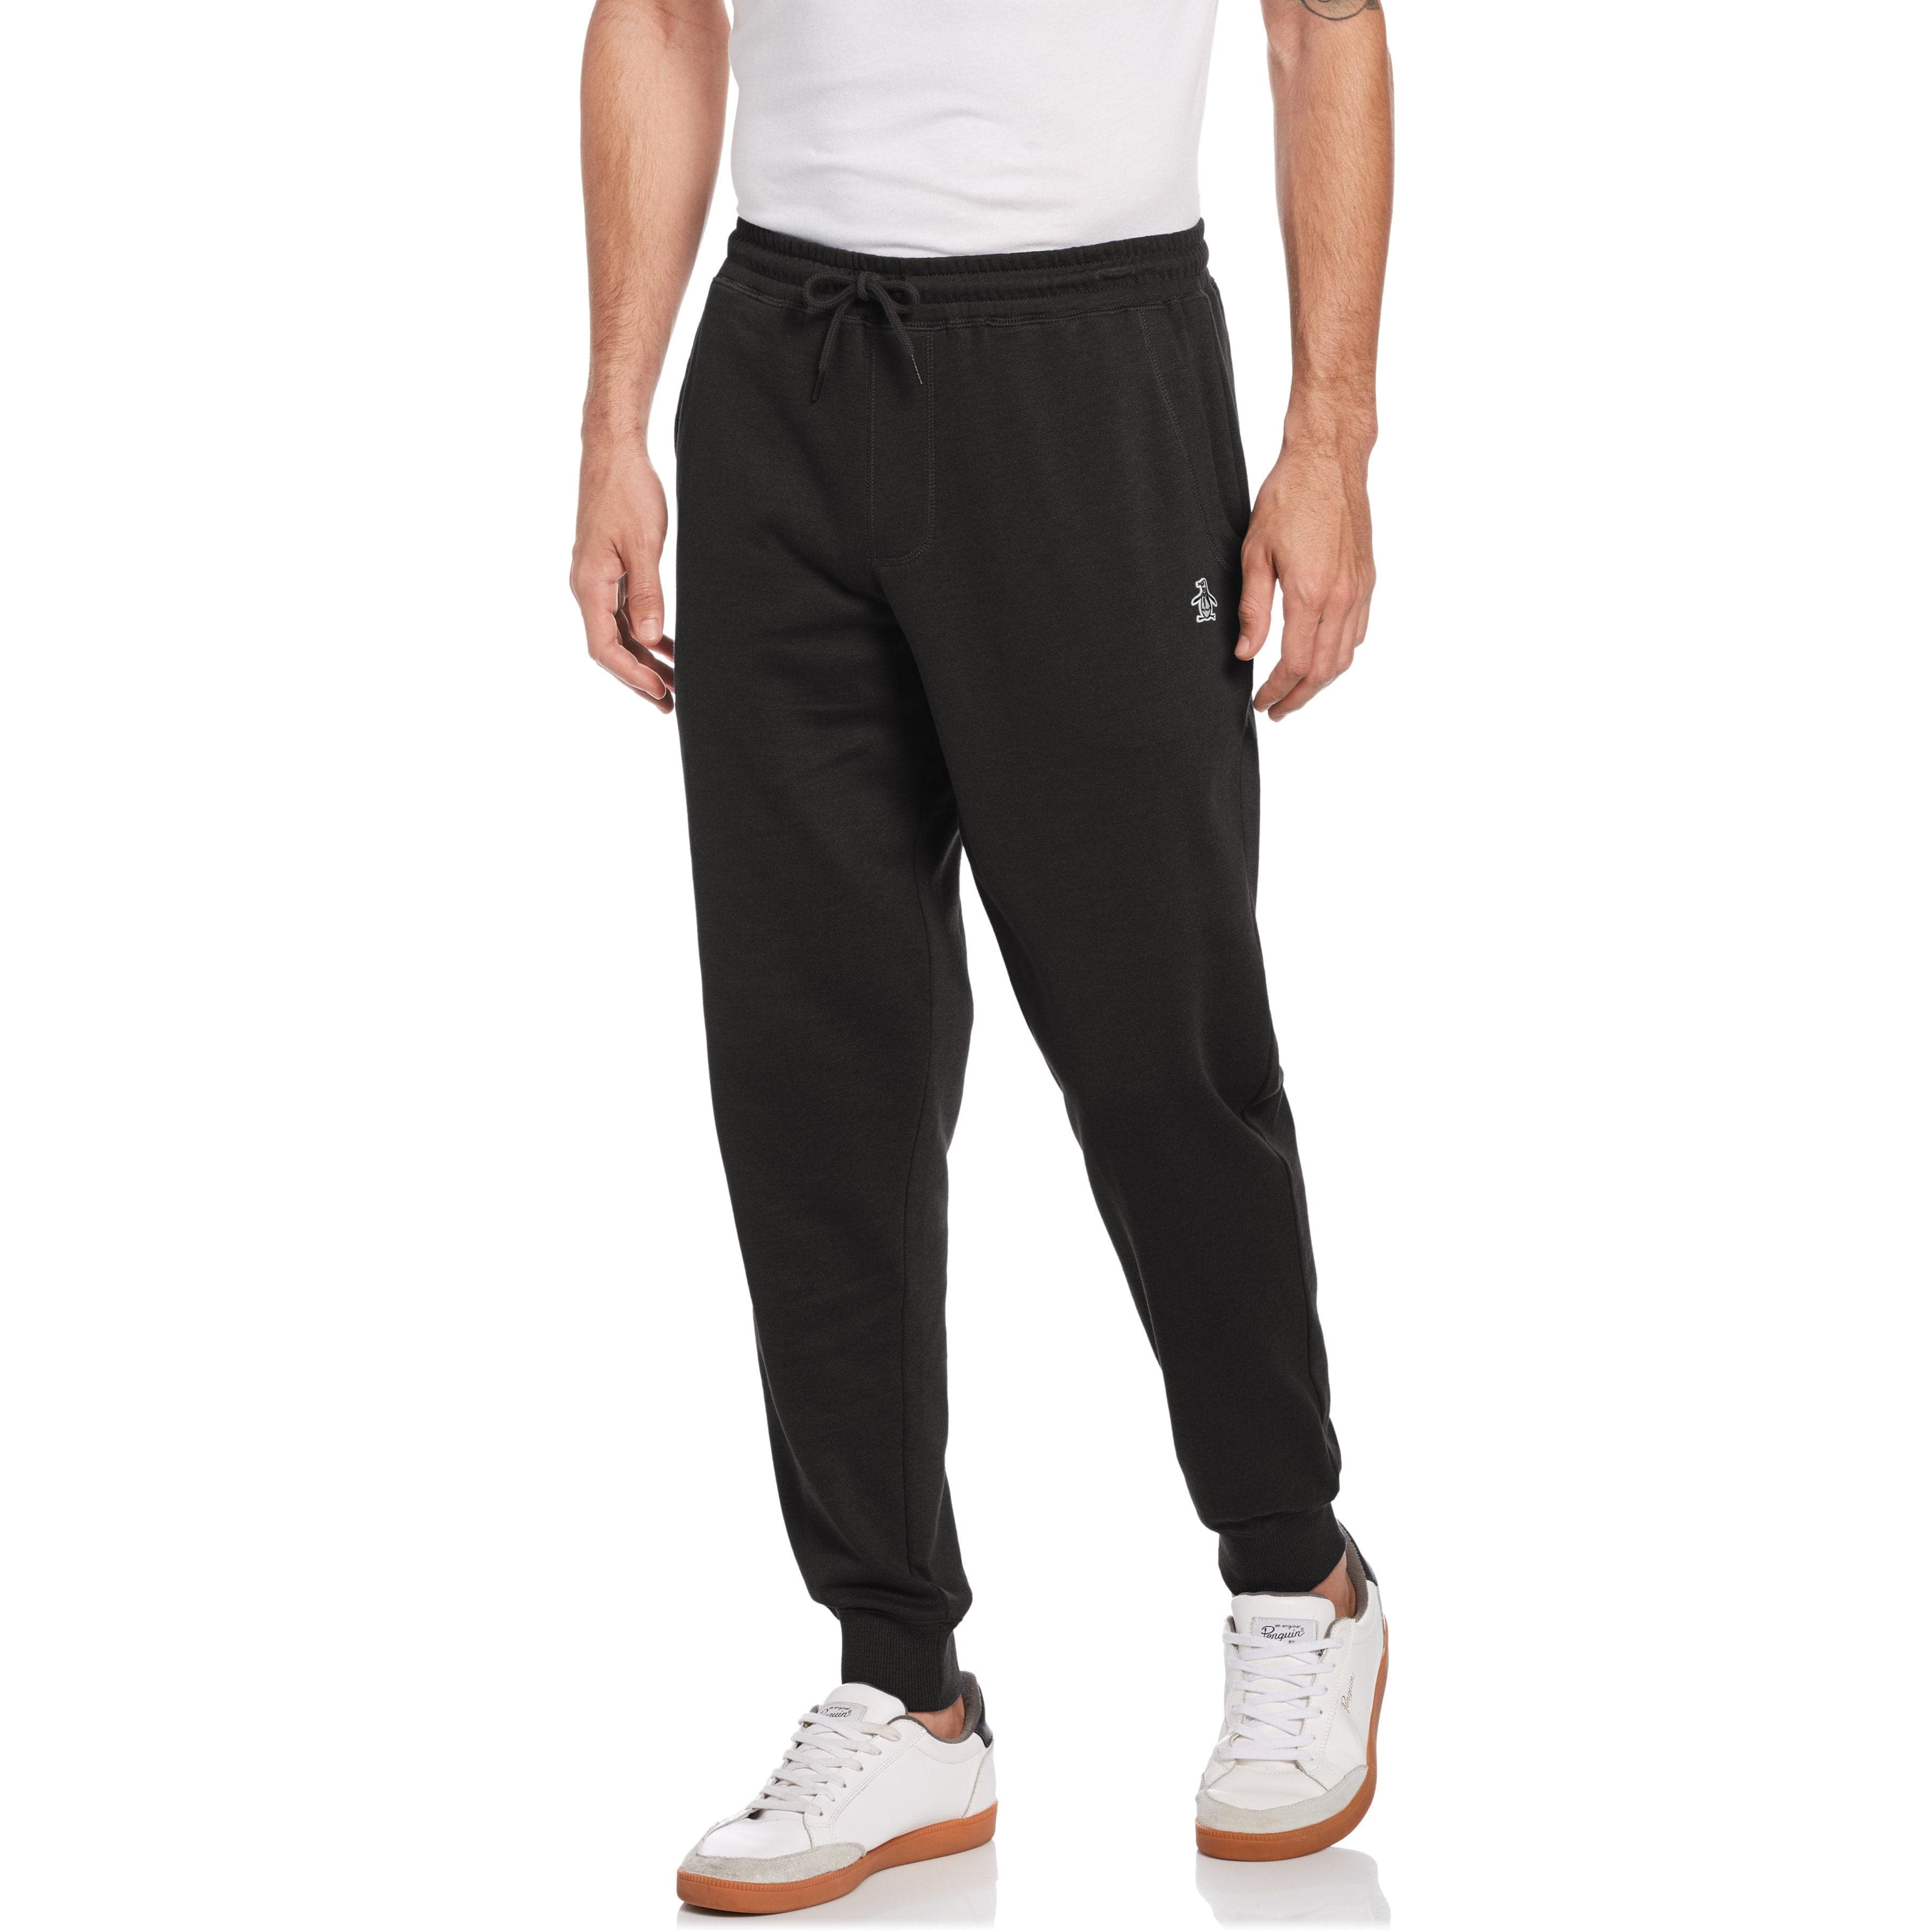 Under Armour Sportstyle Jogger Pant Black 1272412-001 - Free